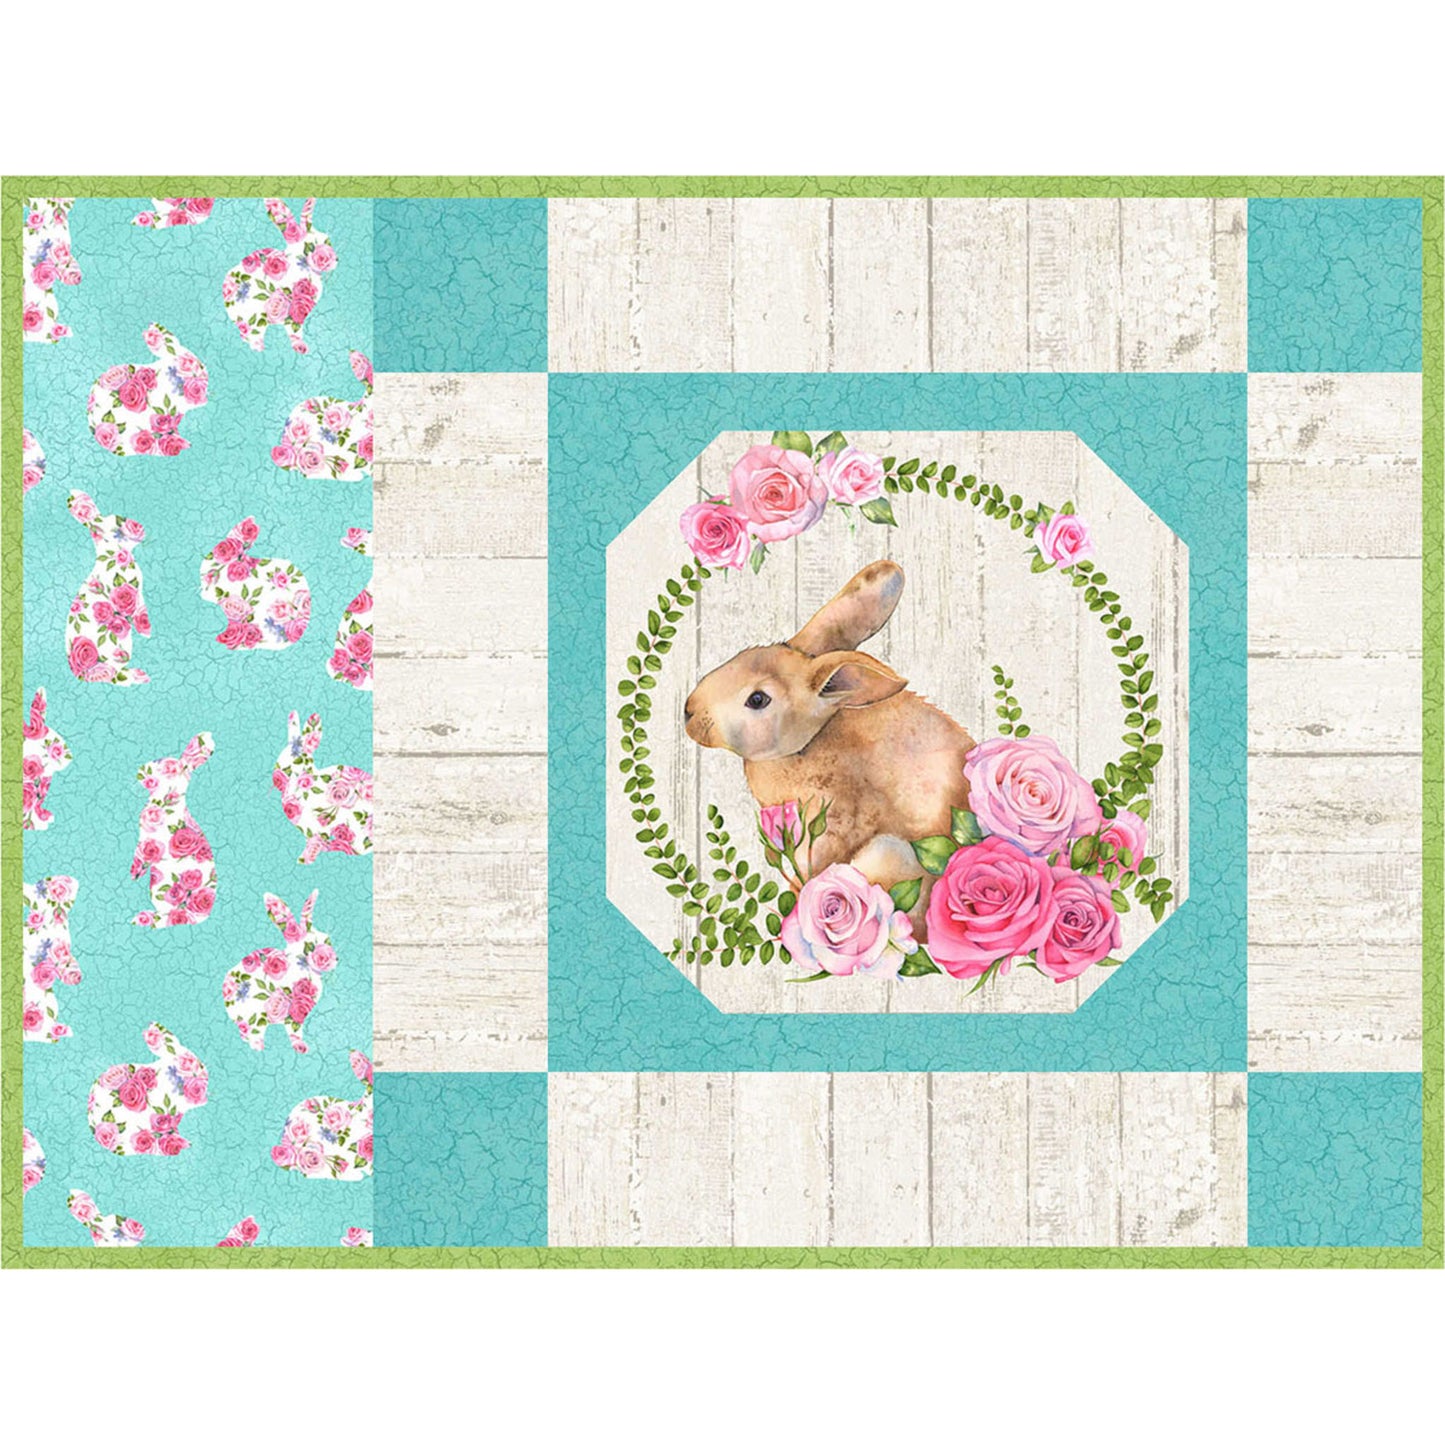 Turquoise and white placemat with bunny and flowers design.